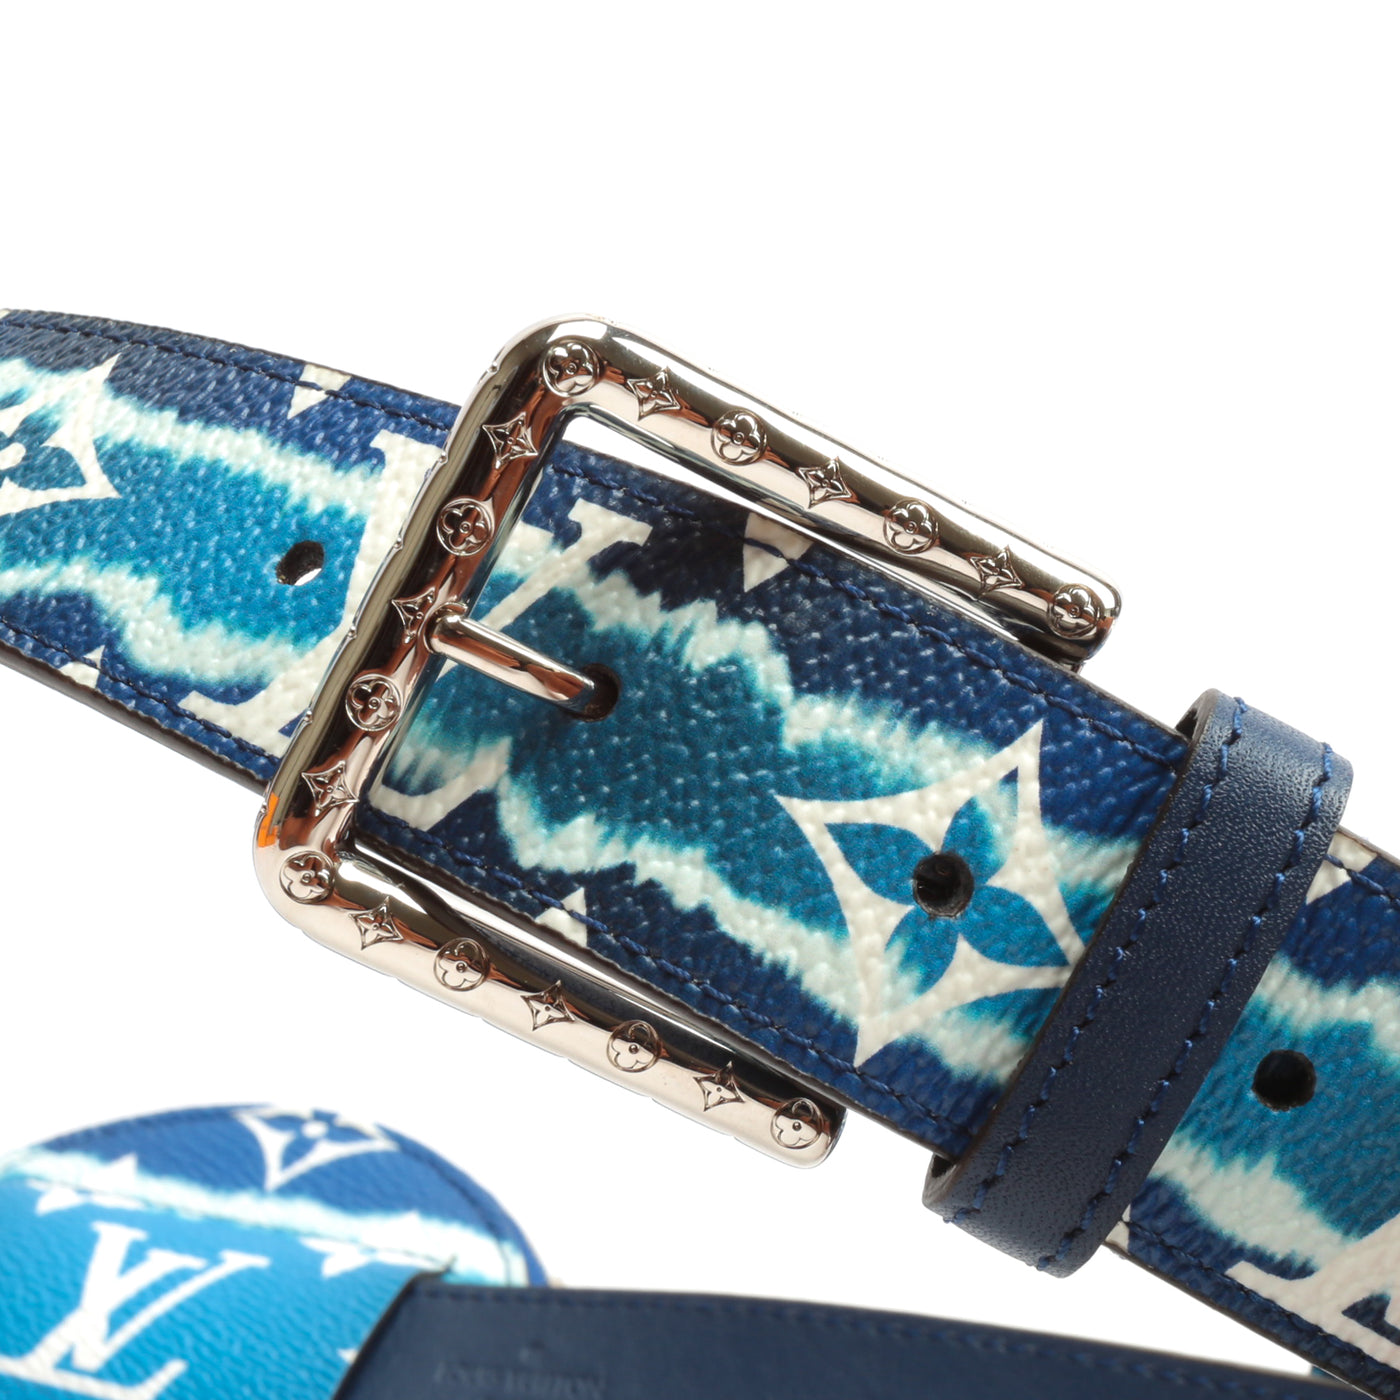 Louis Vuitton Daily Multi Pocket Belt LV Escale 30MM Bleu in Canvas with  Silver-tone - US